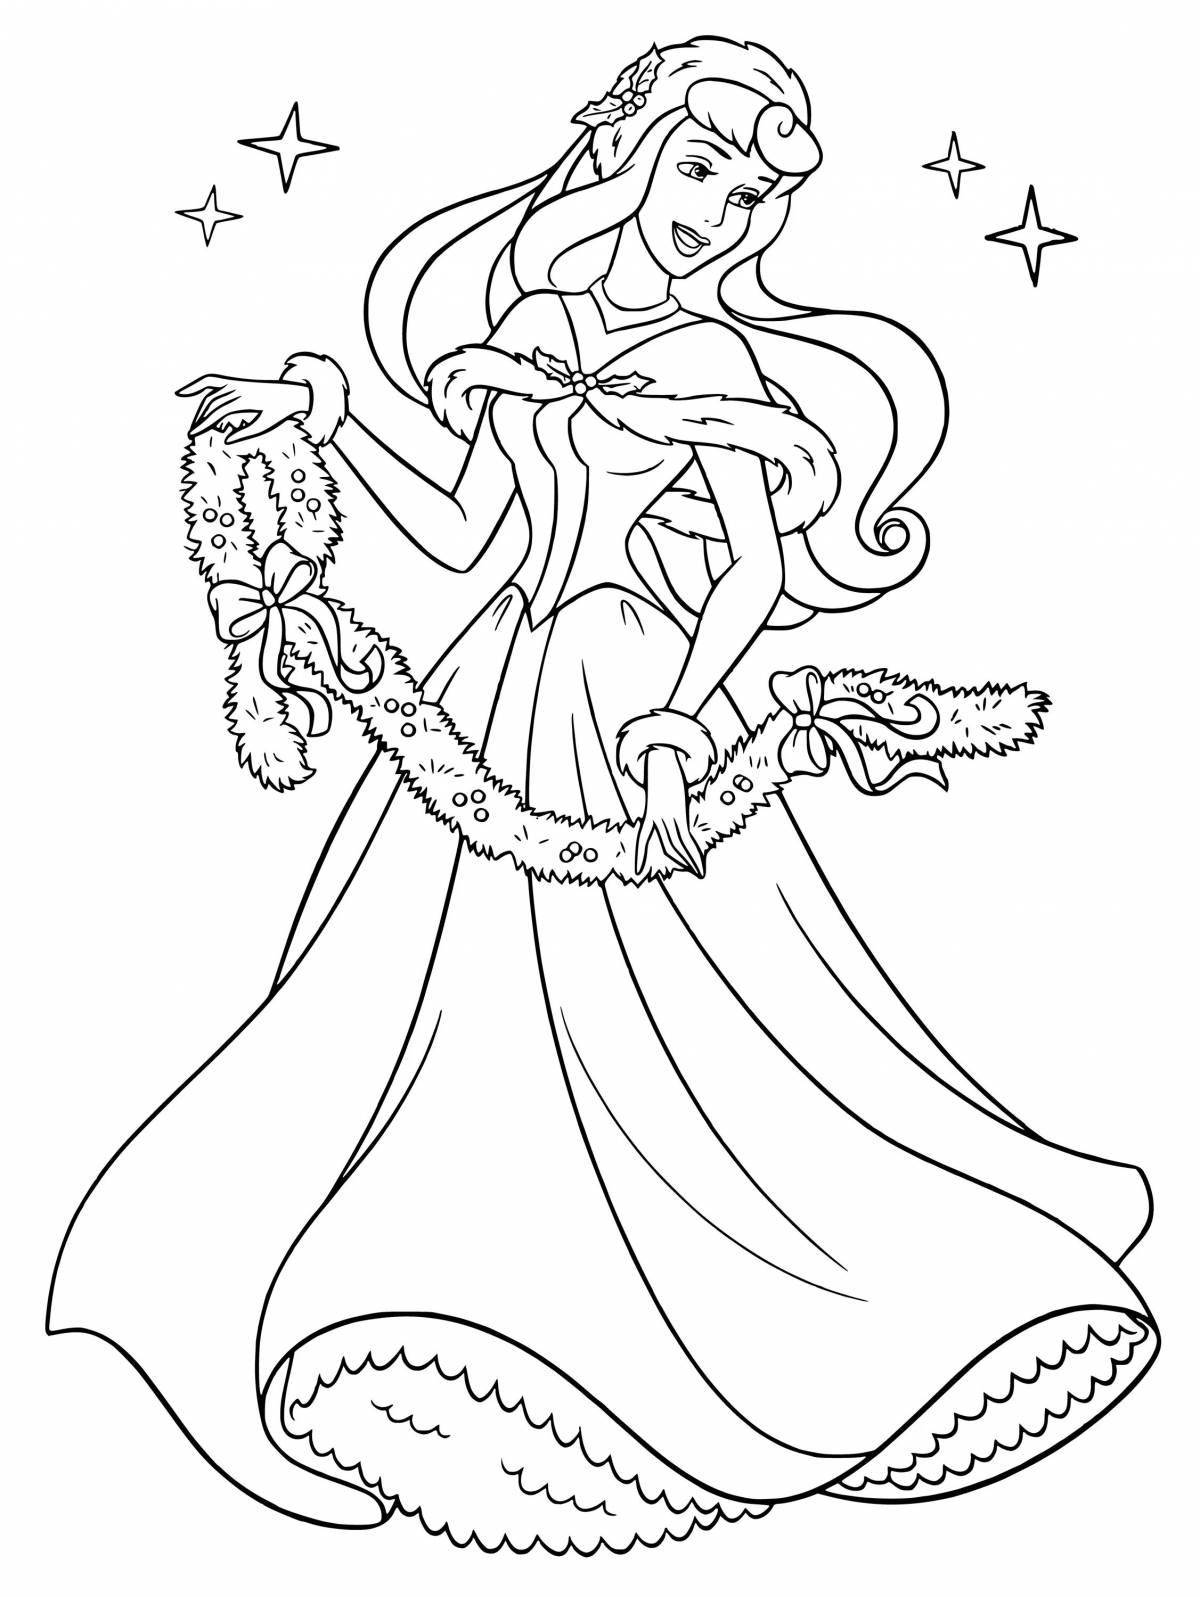 Exquisite princess coloring pages new